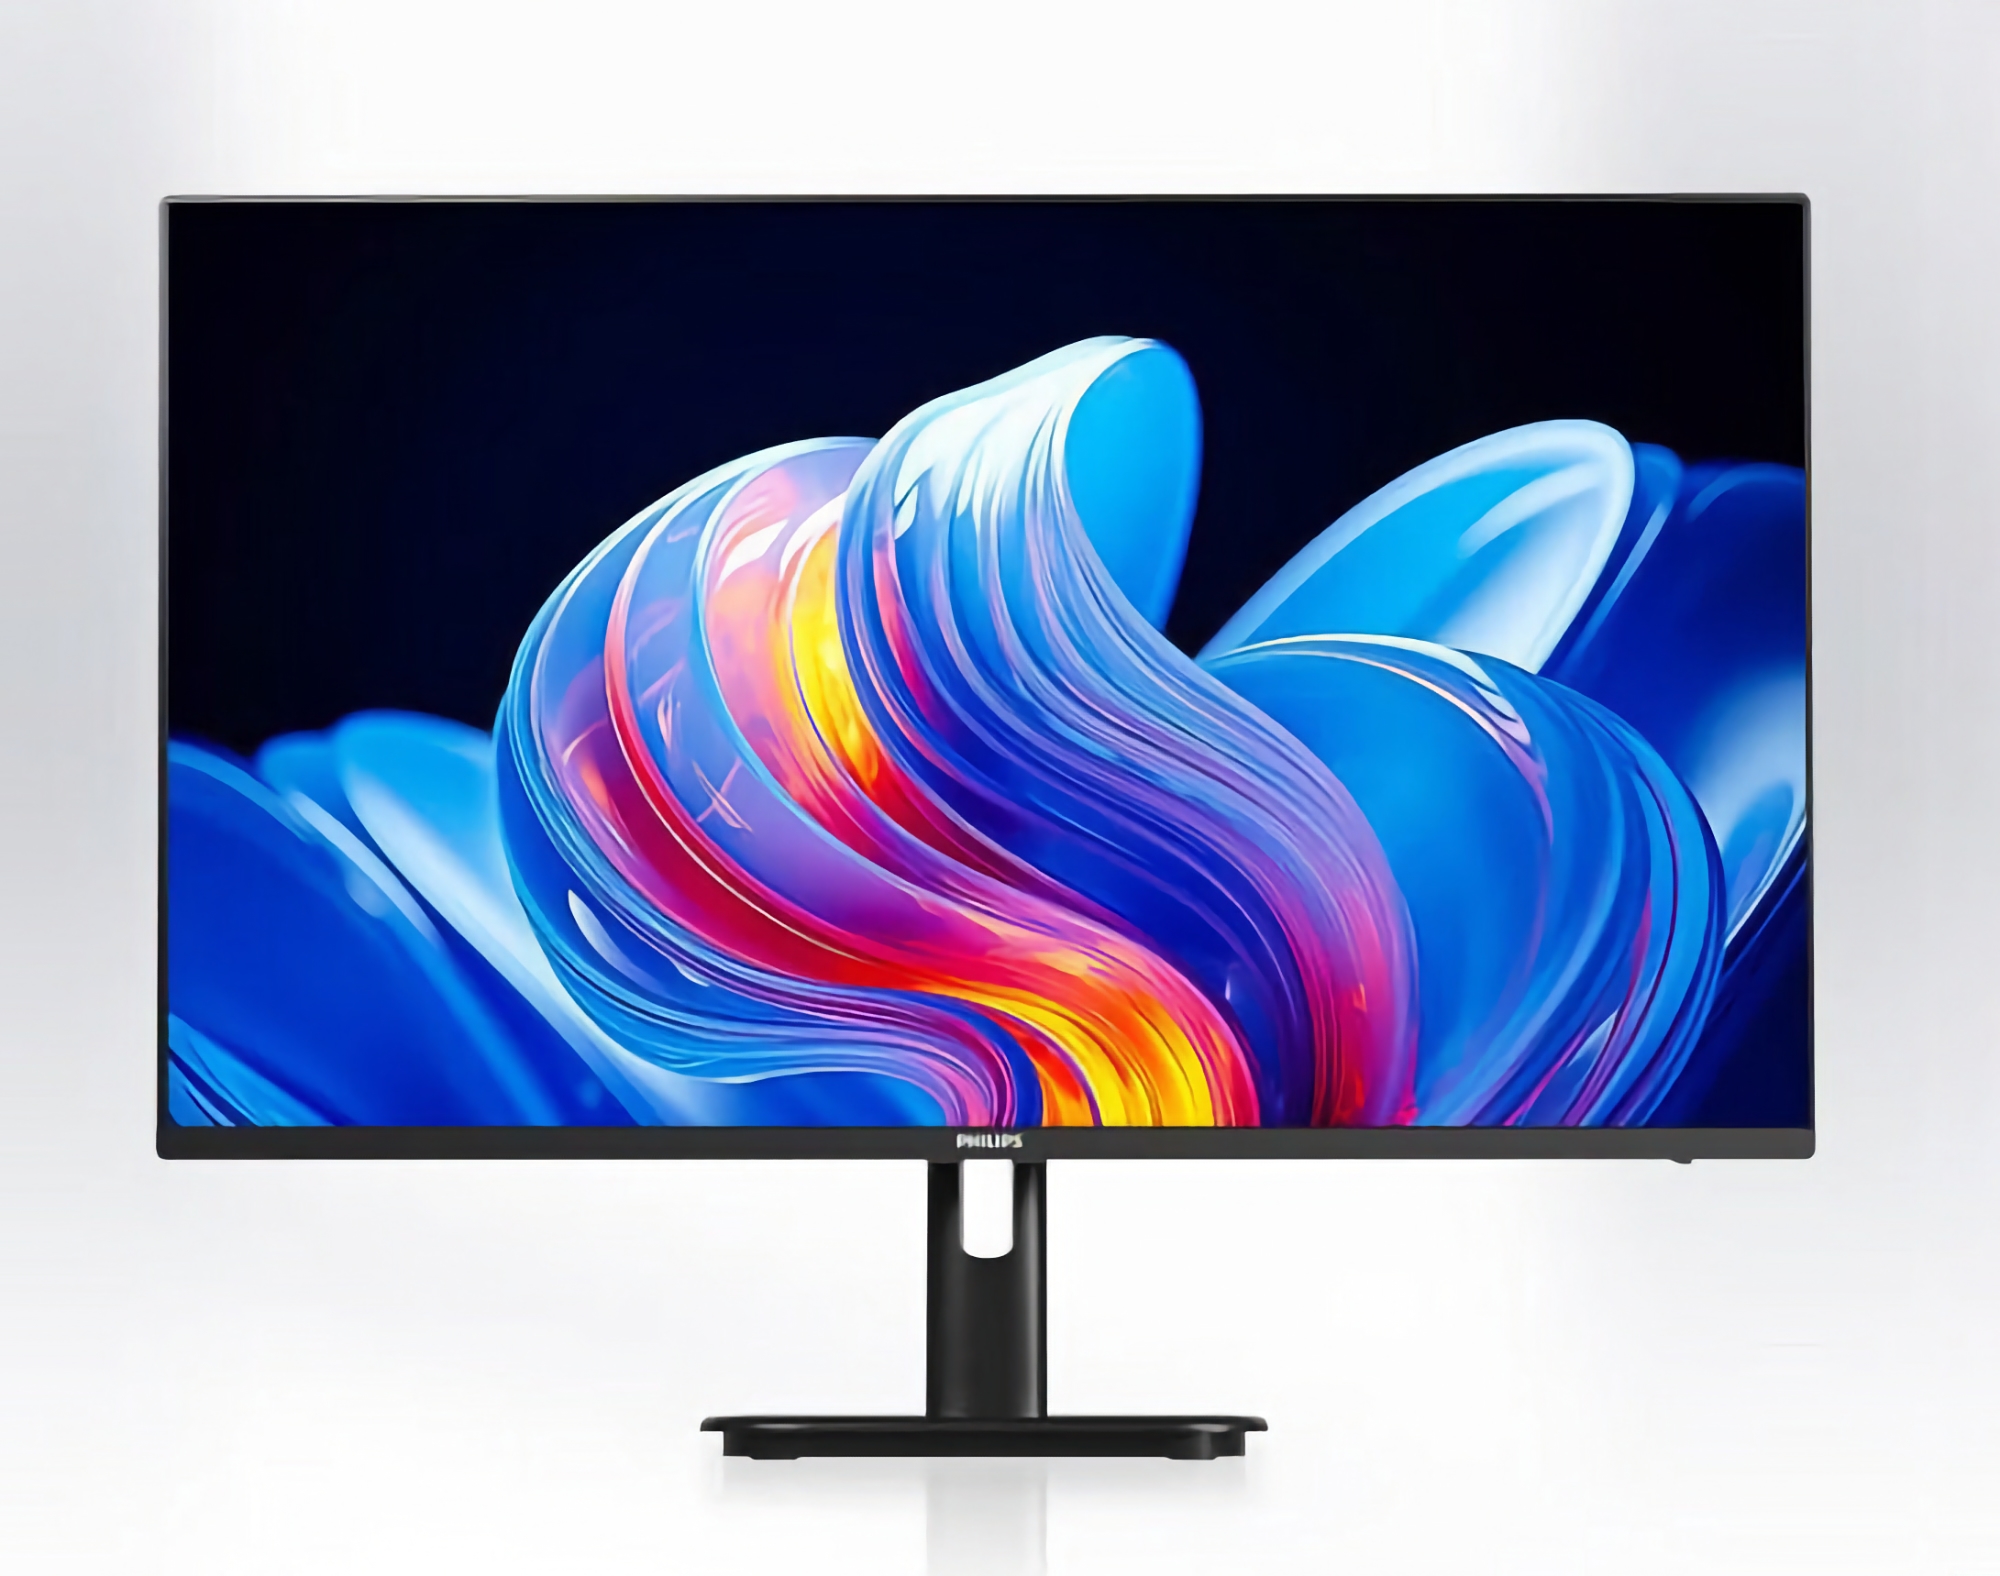 Philips 24E1N1520: 24-inch monitor with 2K resolution and 100Hz refresh rate for $96